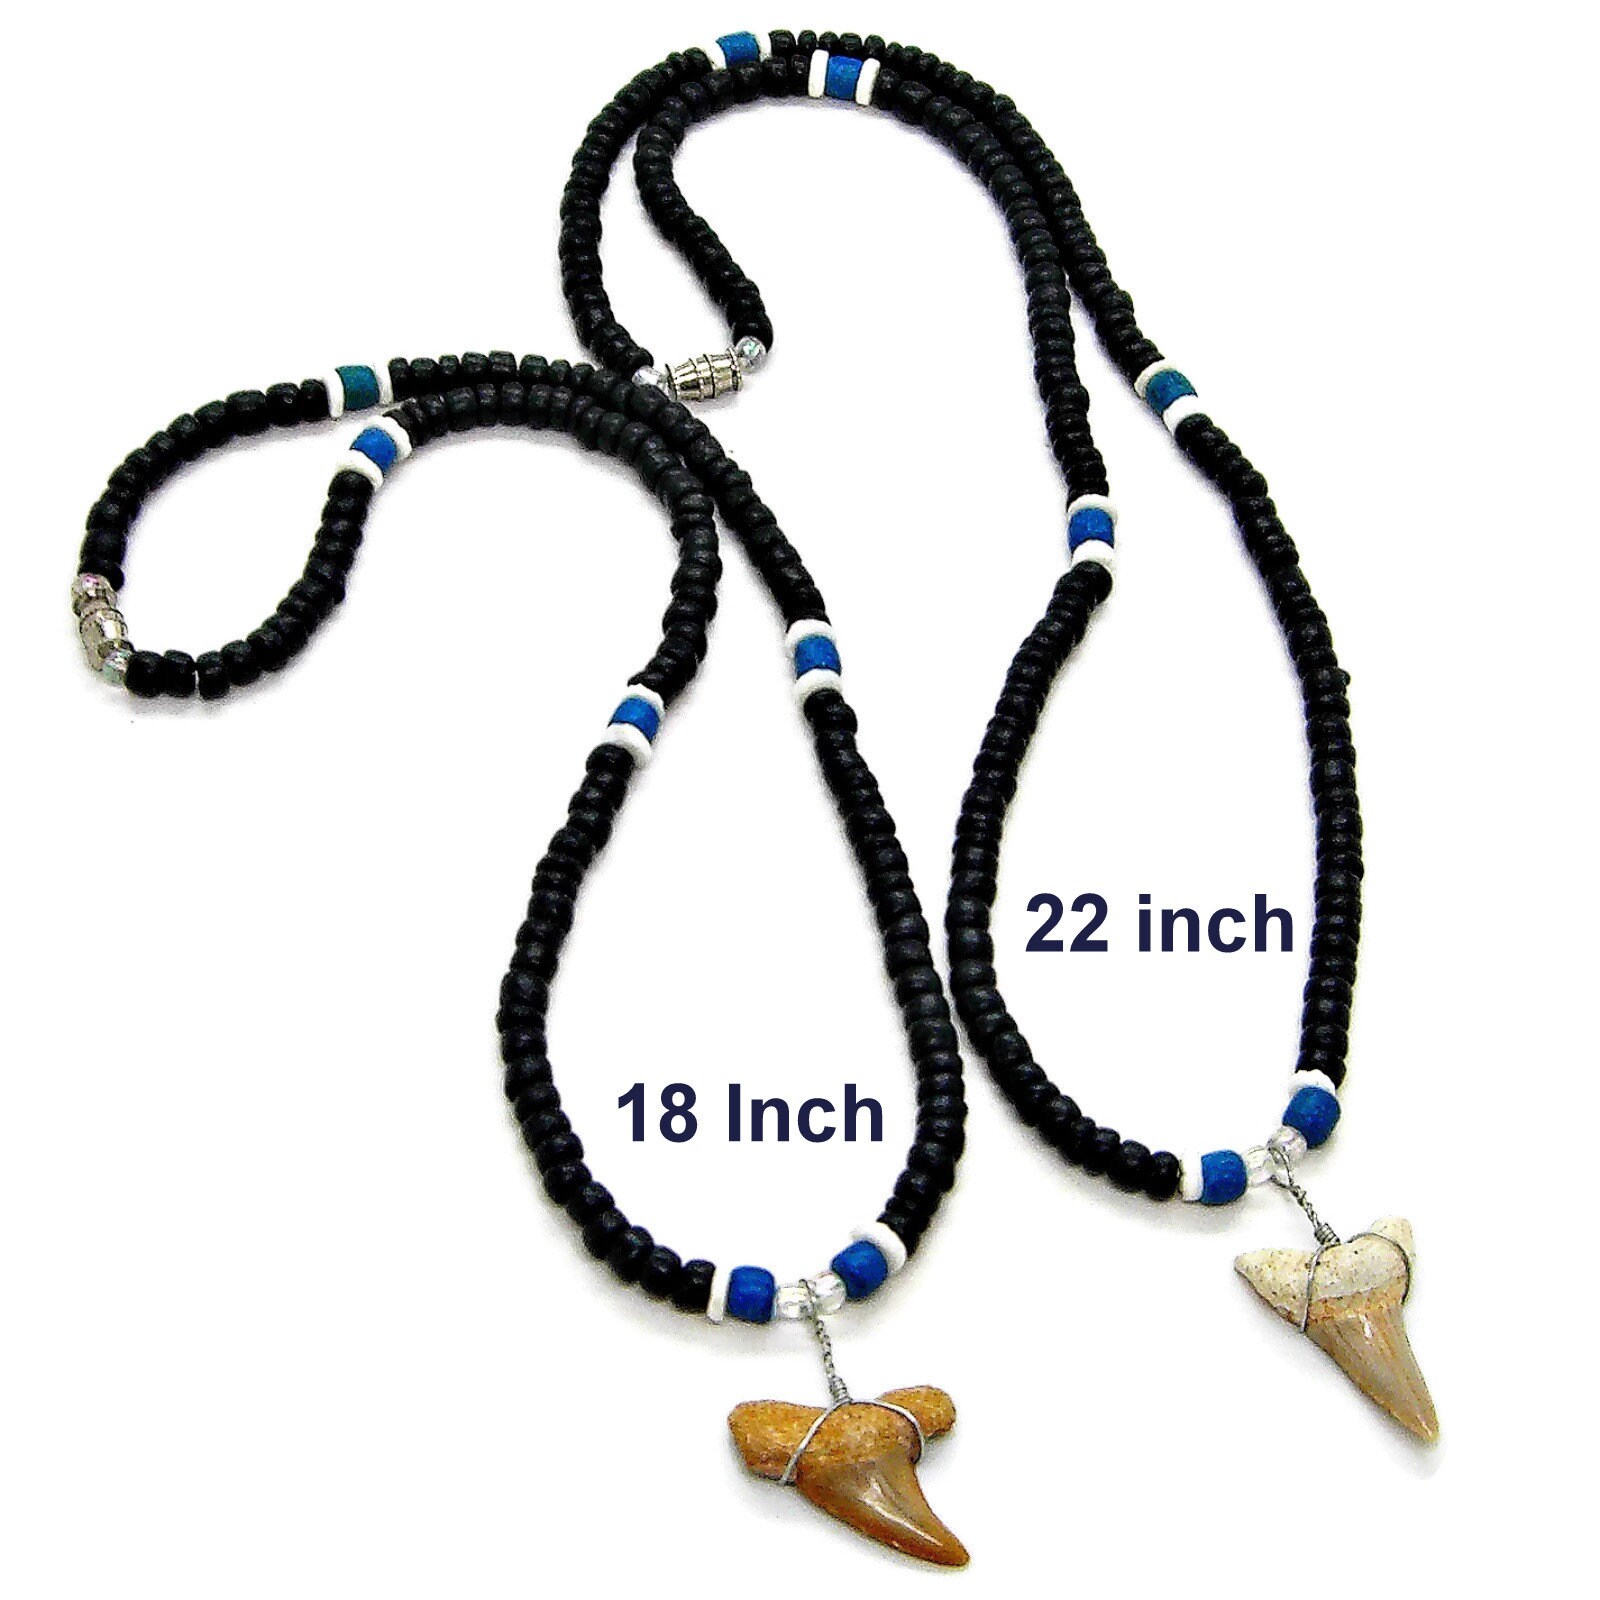 Fossil Lemon Shark Tooth Necklace with Femo Beads – Lowcountry Geologic